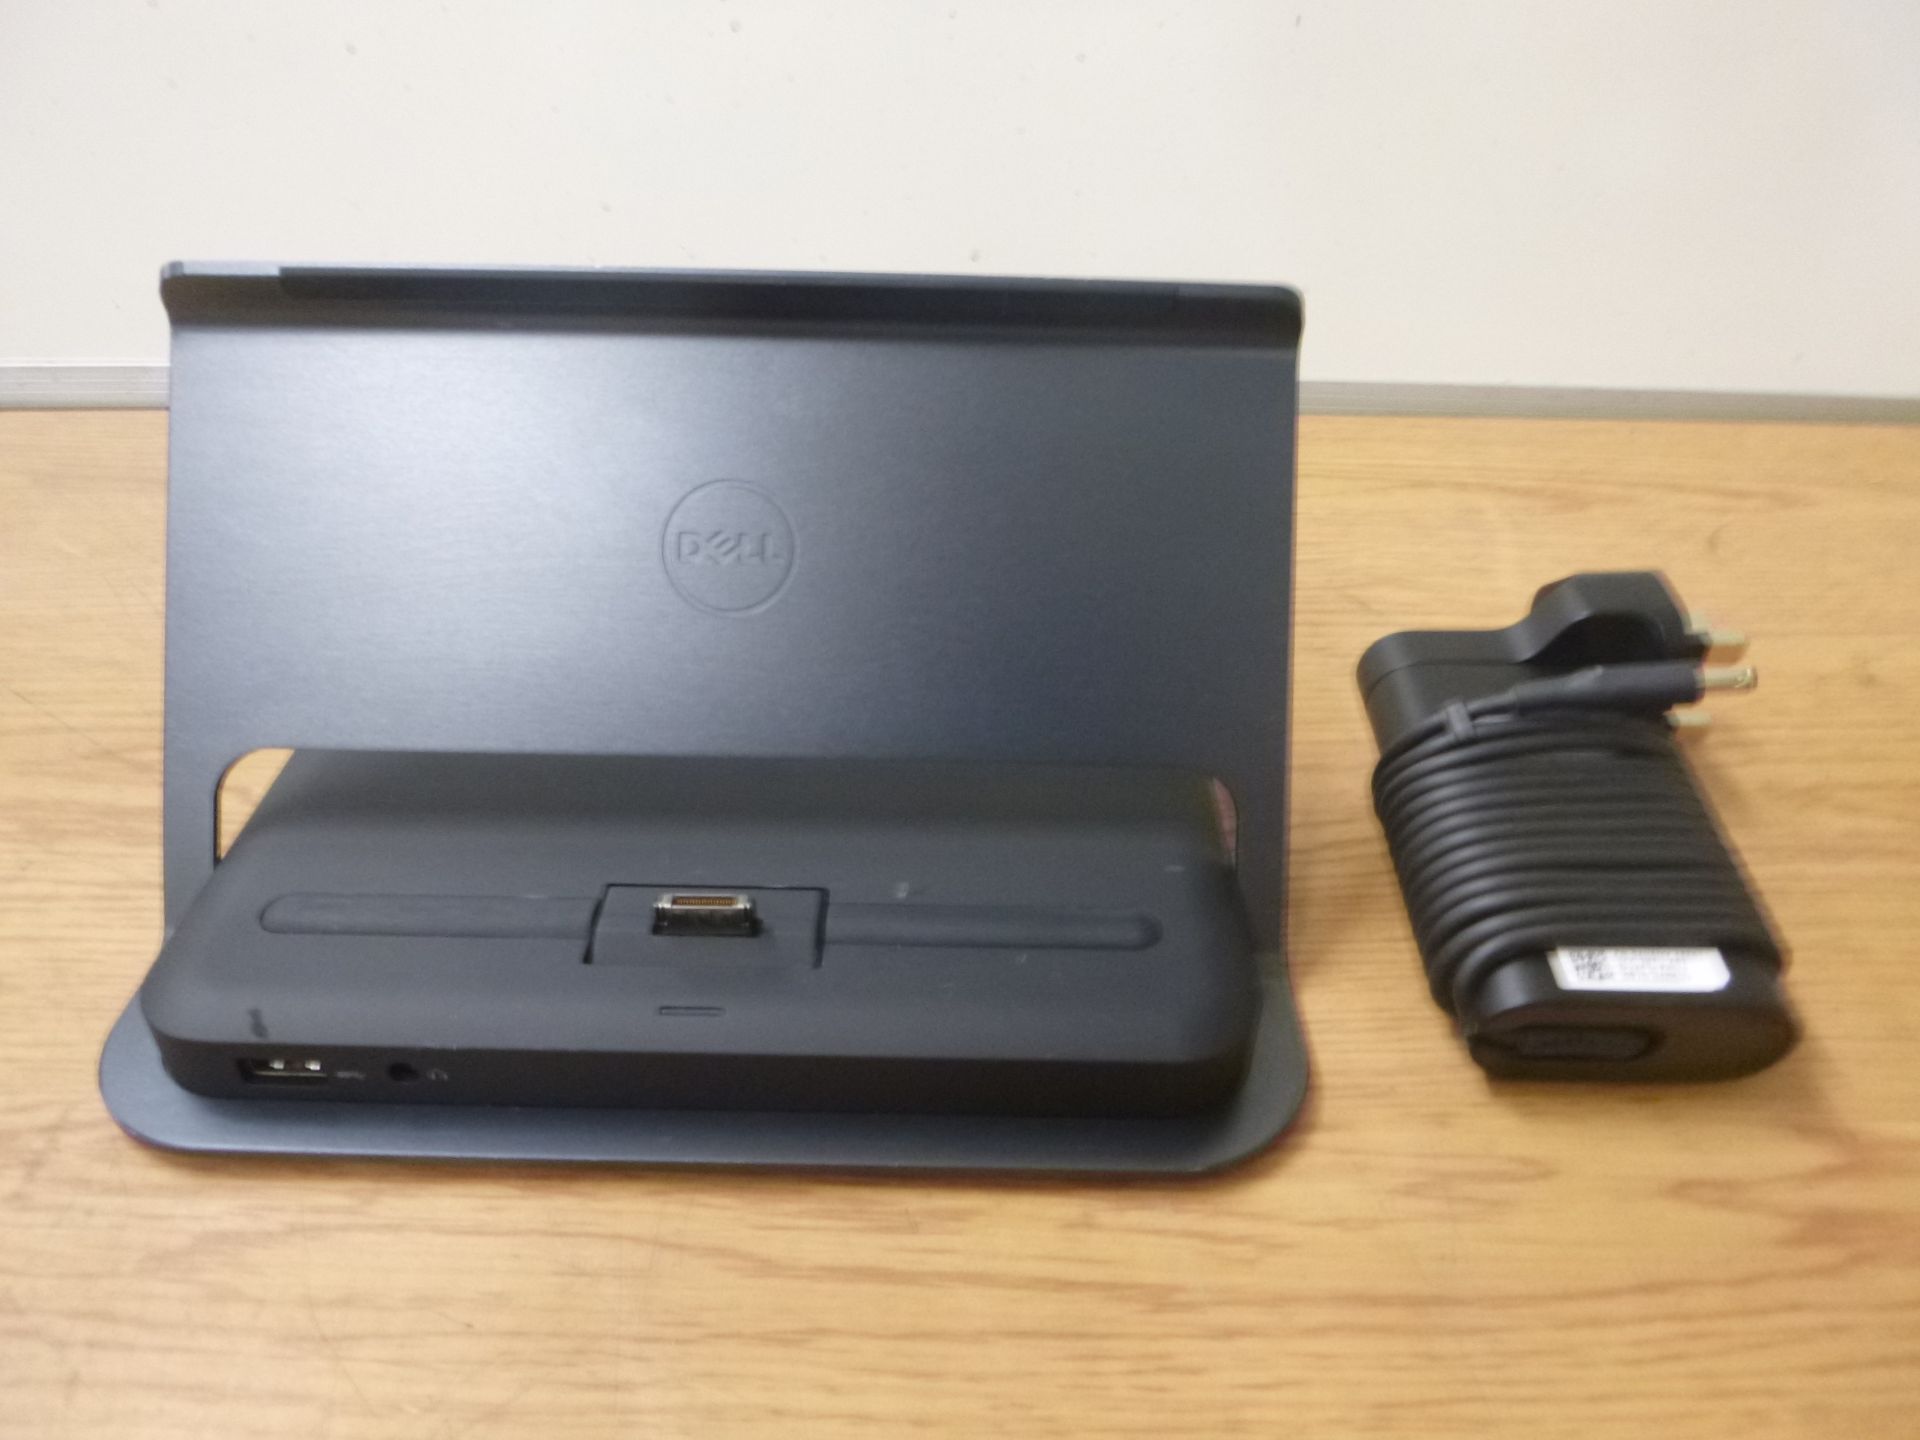 Dell Venue 11 Pro Tablet Docking Station 5130 / 7130 / 7139 / 7140 / 7350. WITH PSU.